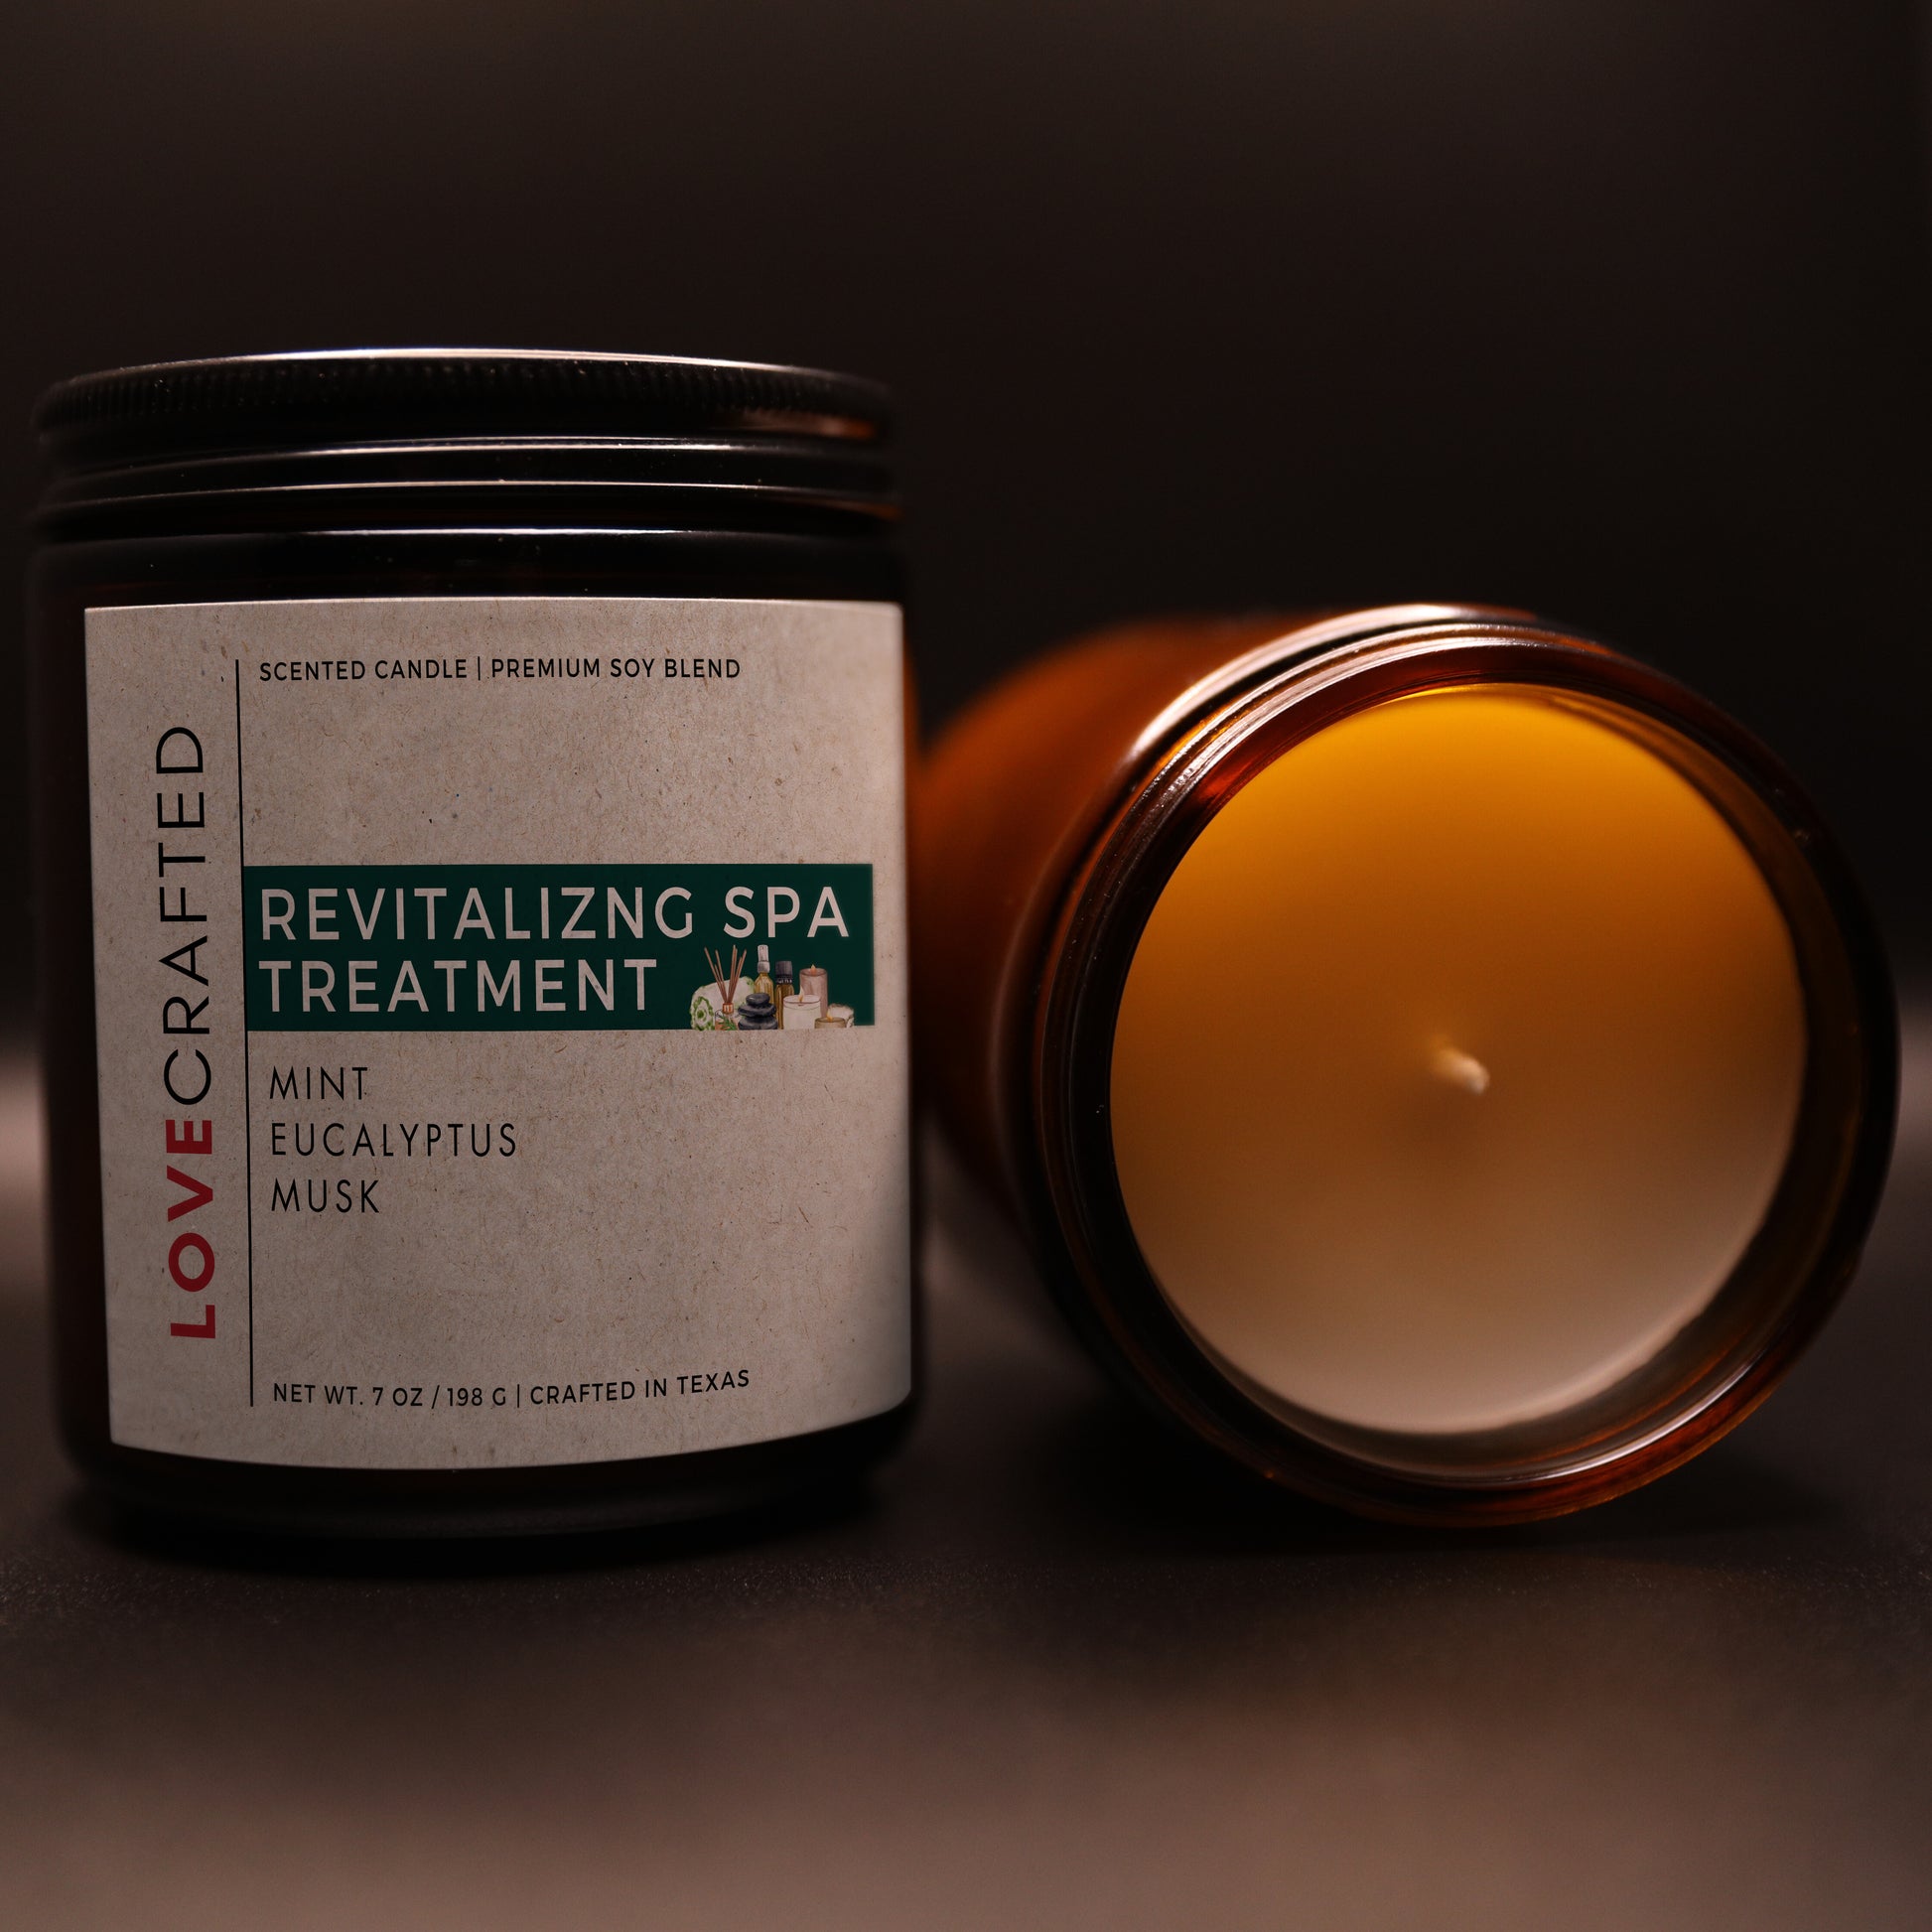 Revitalizing Spa Treatment, a Fresh and Clean Lovecrafted Candle